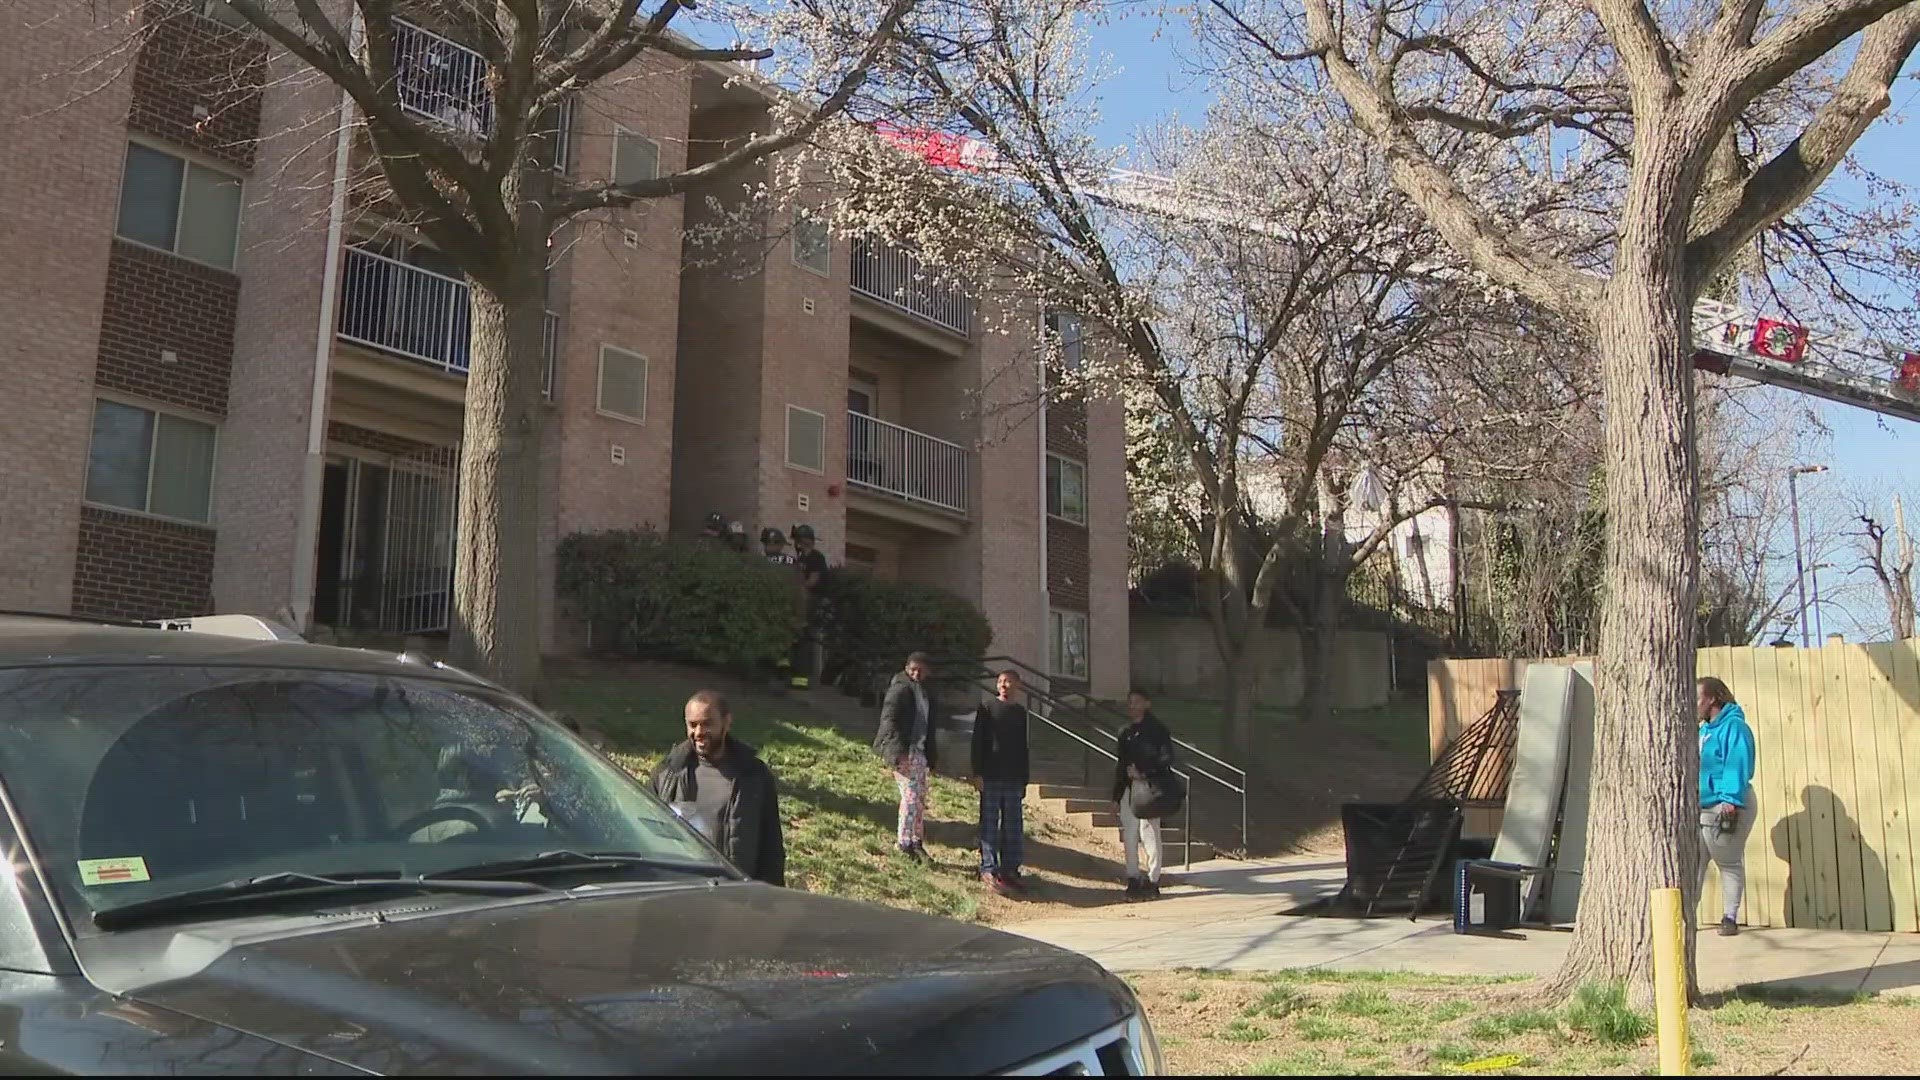 A 5-year-old boy has died from injuries he received in an apartment fire in Southeast D.C.